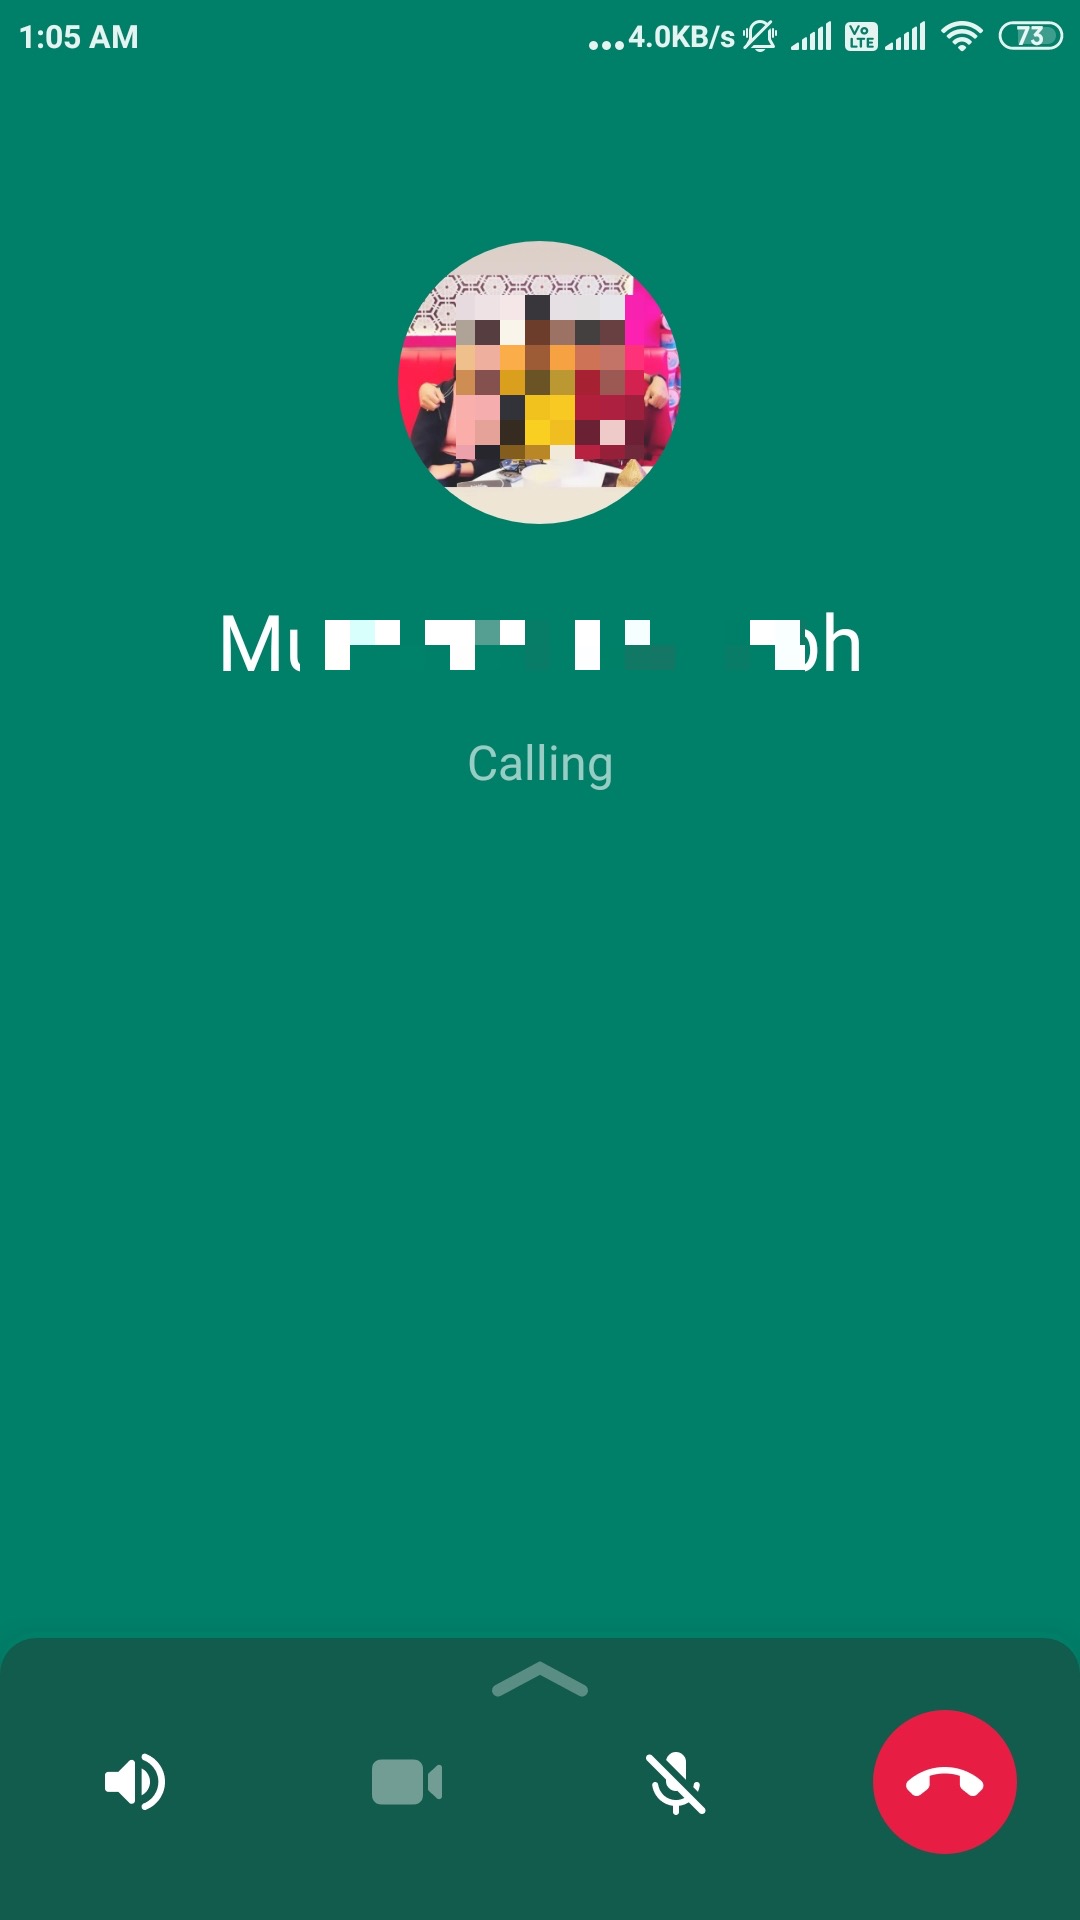 Teams call keeps ringing continuously even after answering